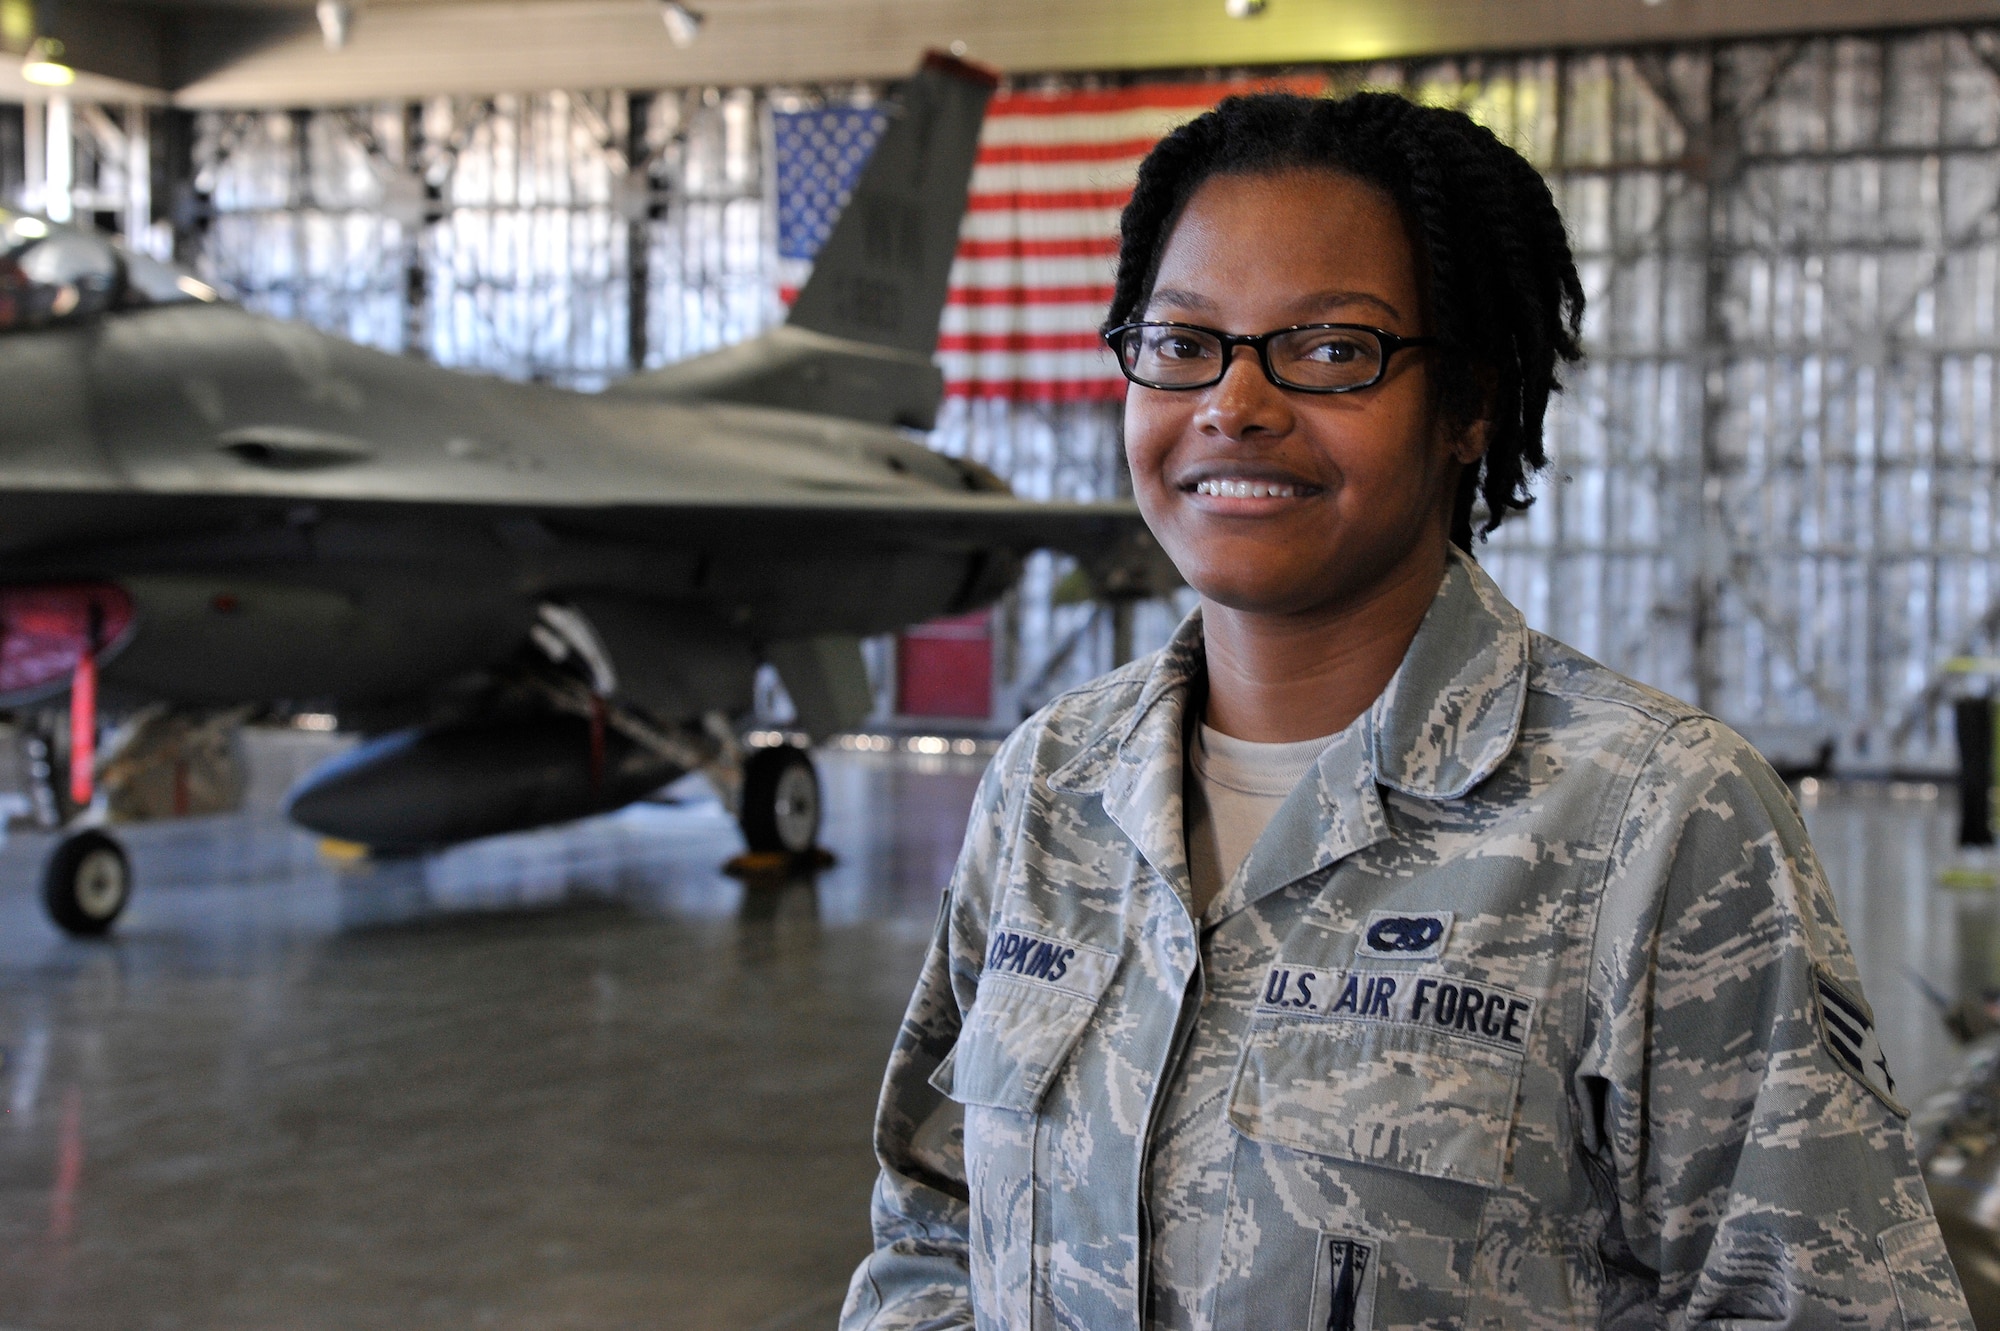 U.S. Air Force Senior Airman Kayla Hopkins, 35th Maintenance Group weapons load crew evaluator, poses in front of an F-16 Fighting Falcon at Misawa Air Base, Japan, Mar. 26, 2015. Hopkins’ responsibilities include instructing new Airmen on how to load weapons efficiently and ensuring experienced load crews maintain standards. (U.S. Air Force photo by Airman 1st Class Patrick S. Ciccarone/Released)